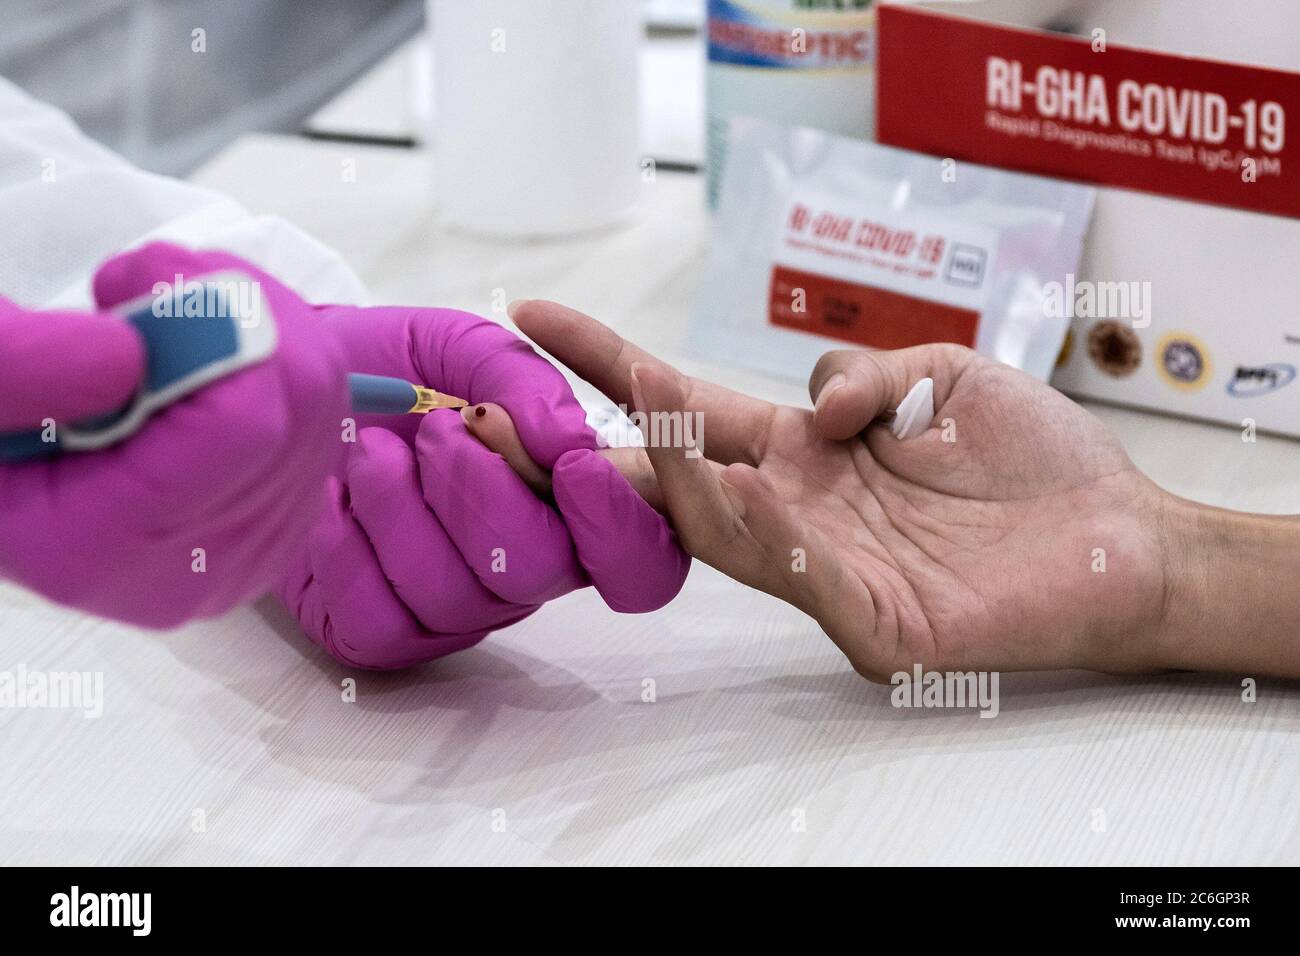 Jakarta, Indonesia. 09th July, 2020. Medical workers take blood samples from government employees during the Coronavirus test using RI-GHA COVID-19 rapid test in Jakarta, indonesia, on July 9, 2020. The rapid test was to detect early Coronavirus (COVID-19) infections in government employees in order to prevent the spread. The test was also to mark a new normal order by implementing strict health protocols. (Photo by Evan Praditya/INA Photo Agency/Sipa USA) Credit: Sipa USA/Alamy Live News Stock Photo